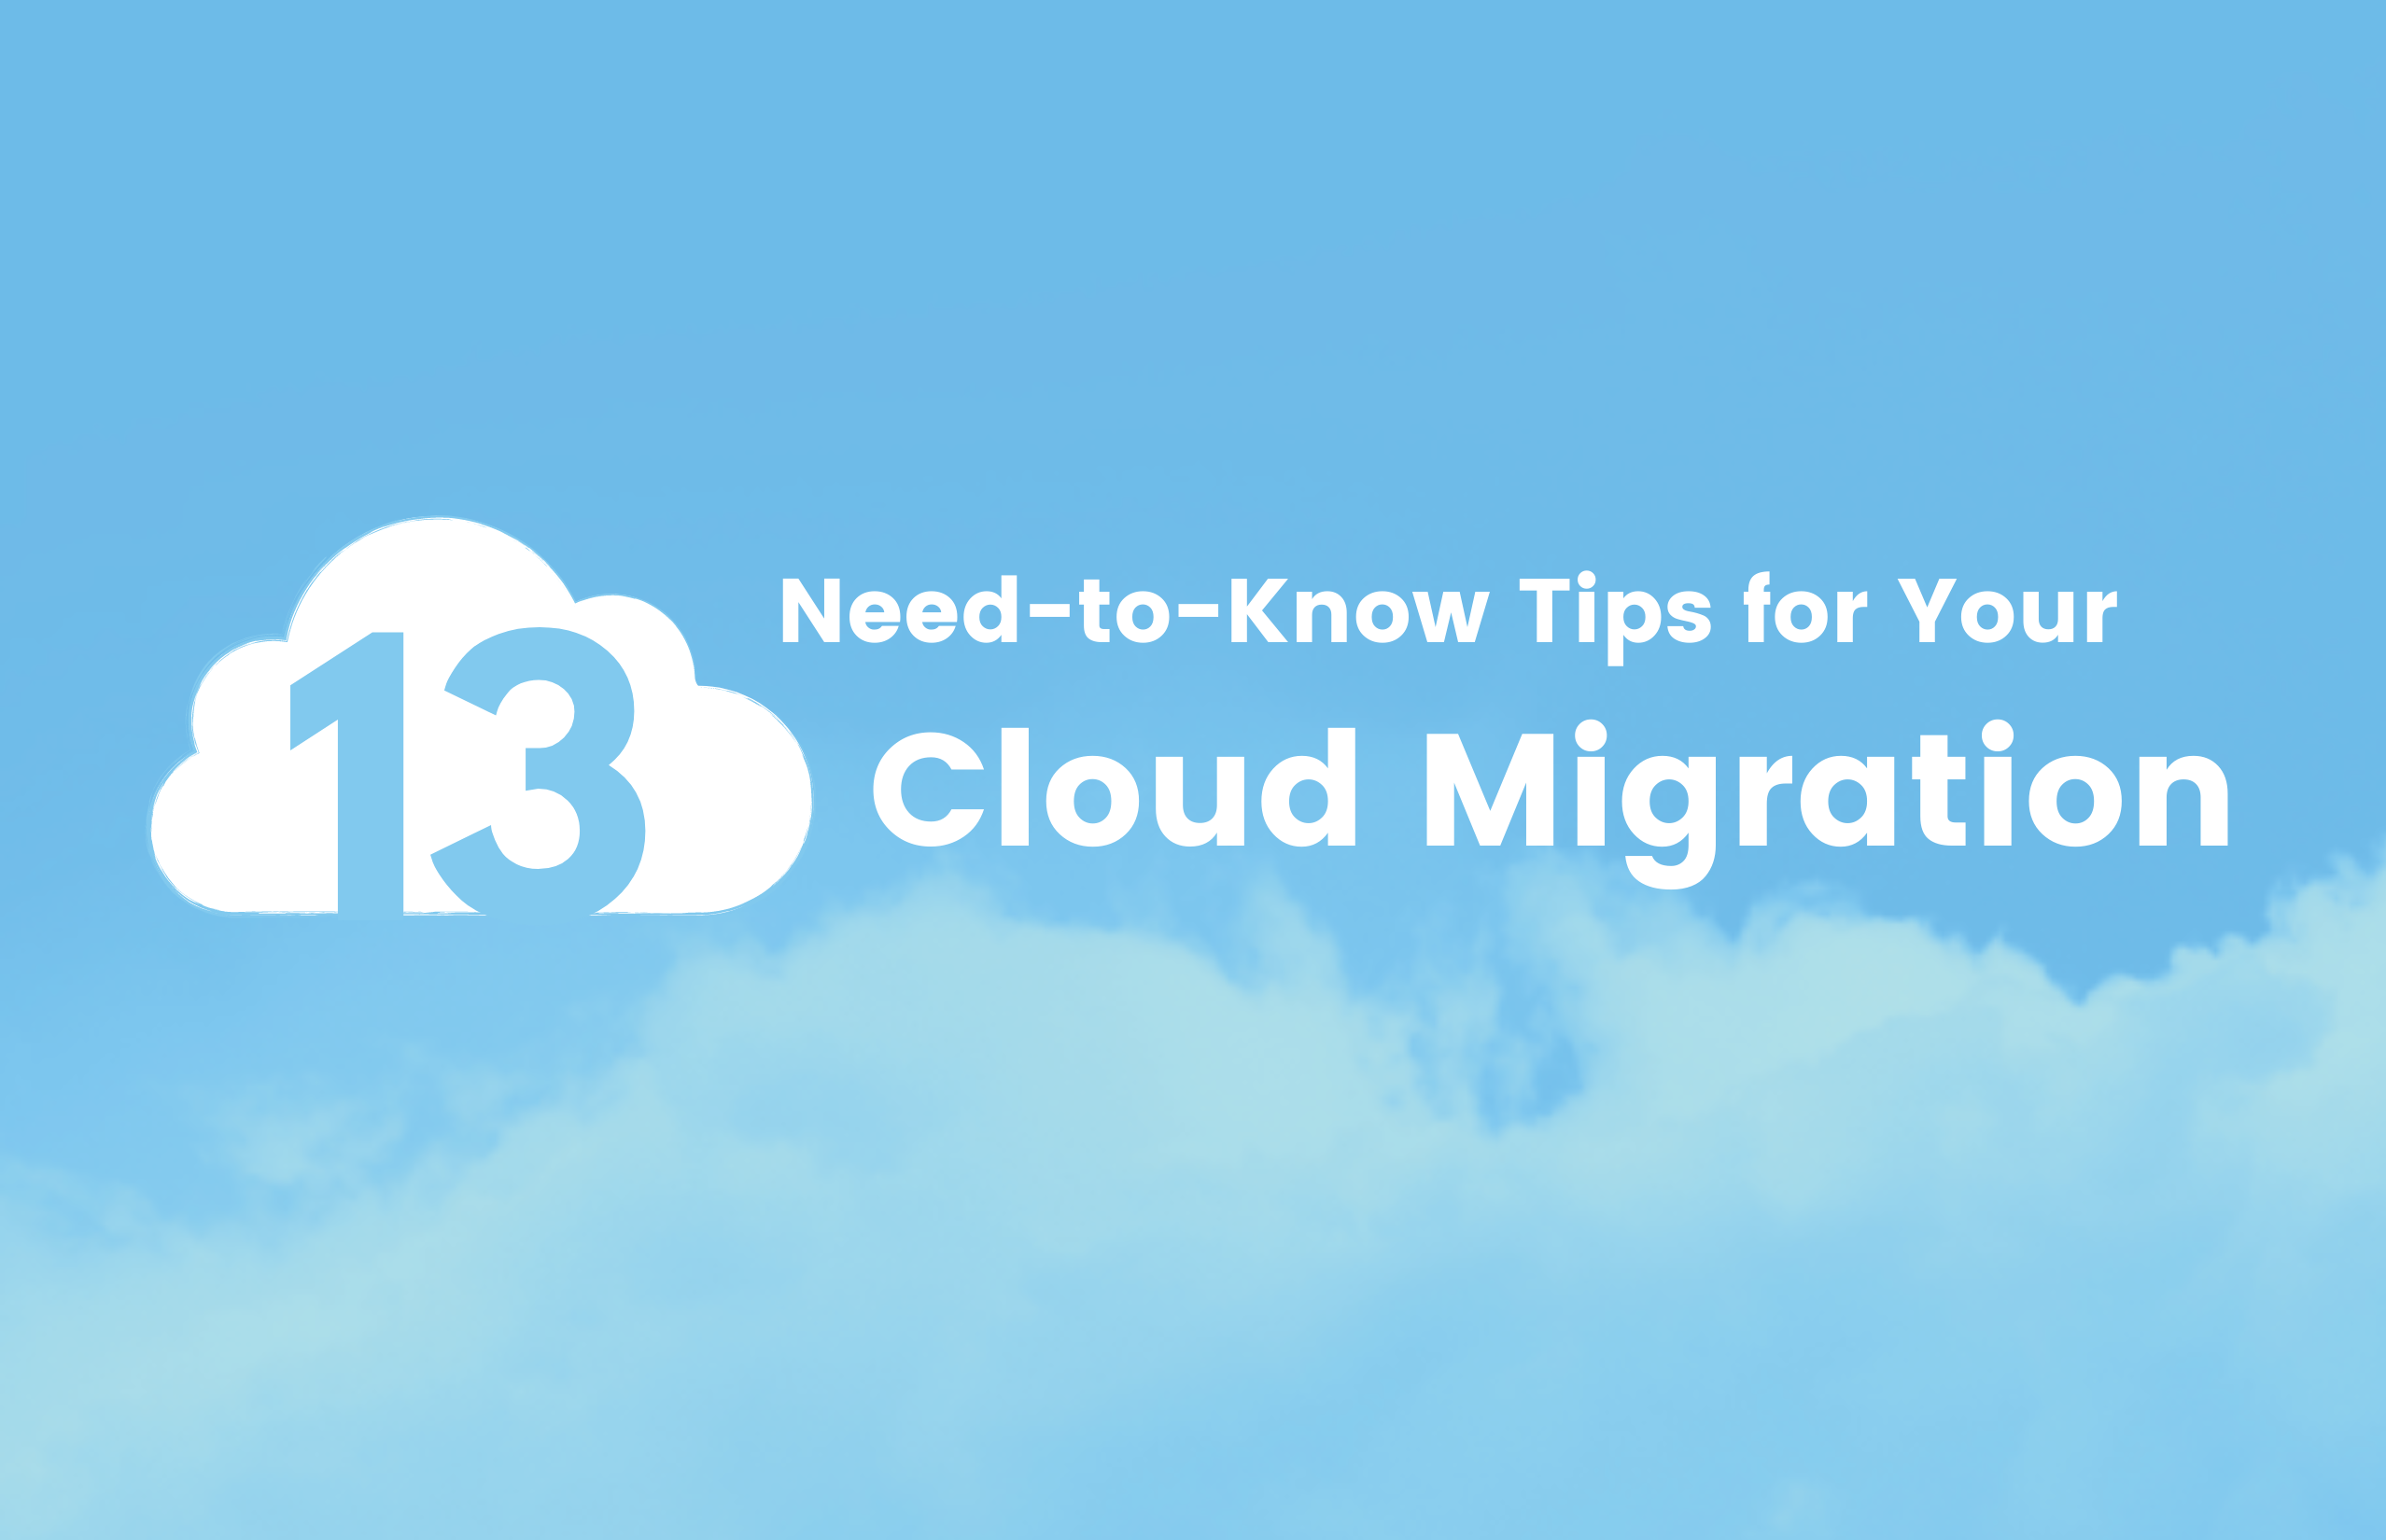 Access Sciences Blog - 13 Need to know tips for your cloud migration